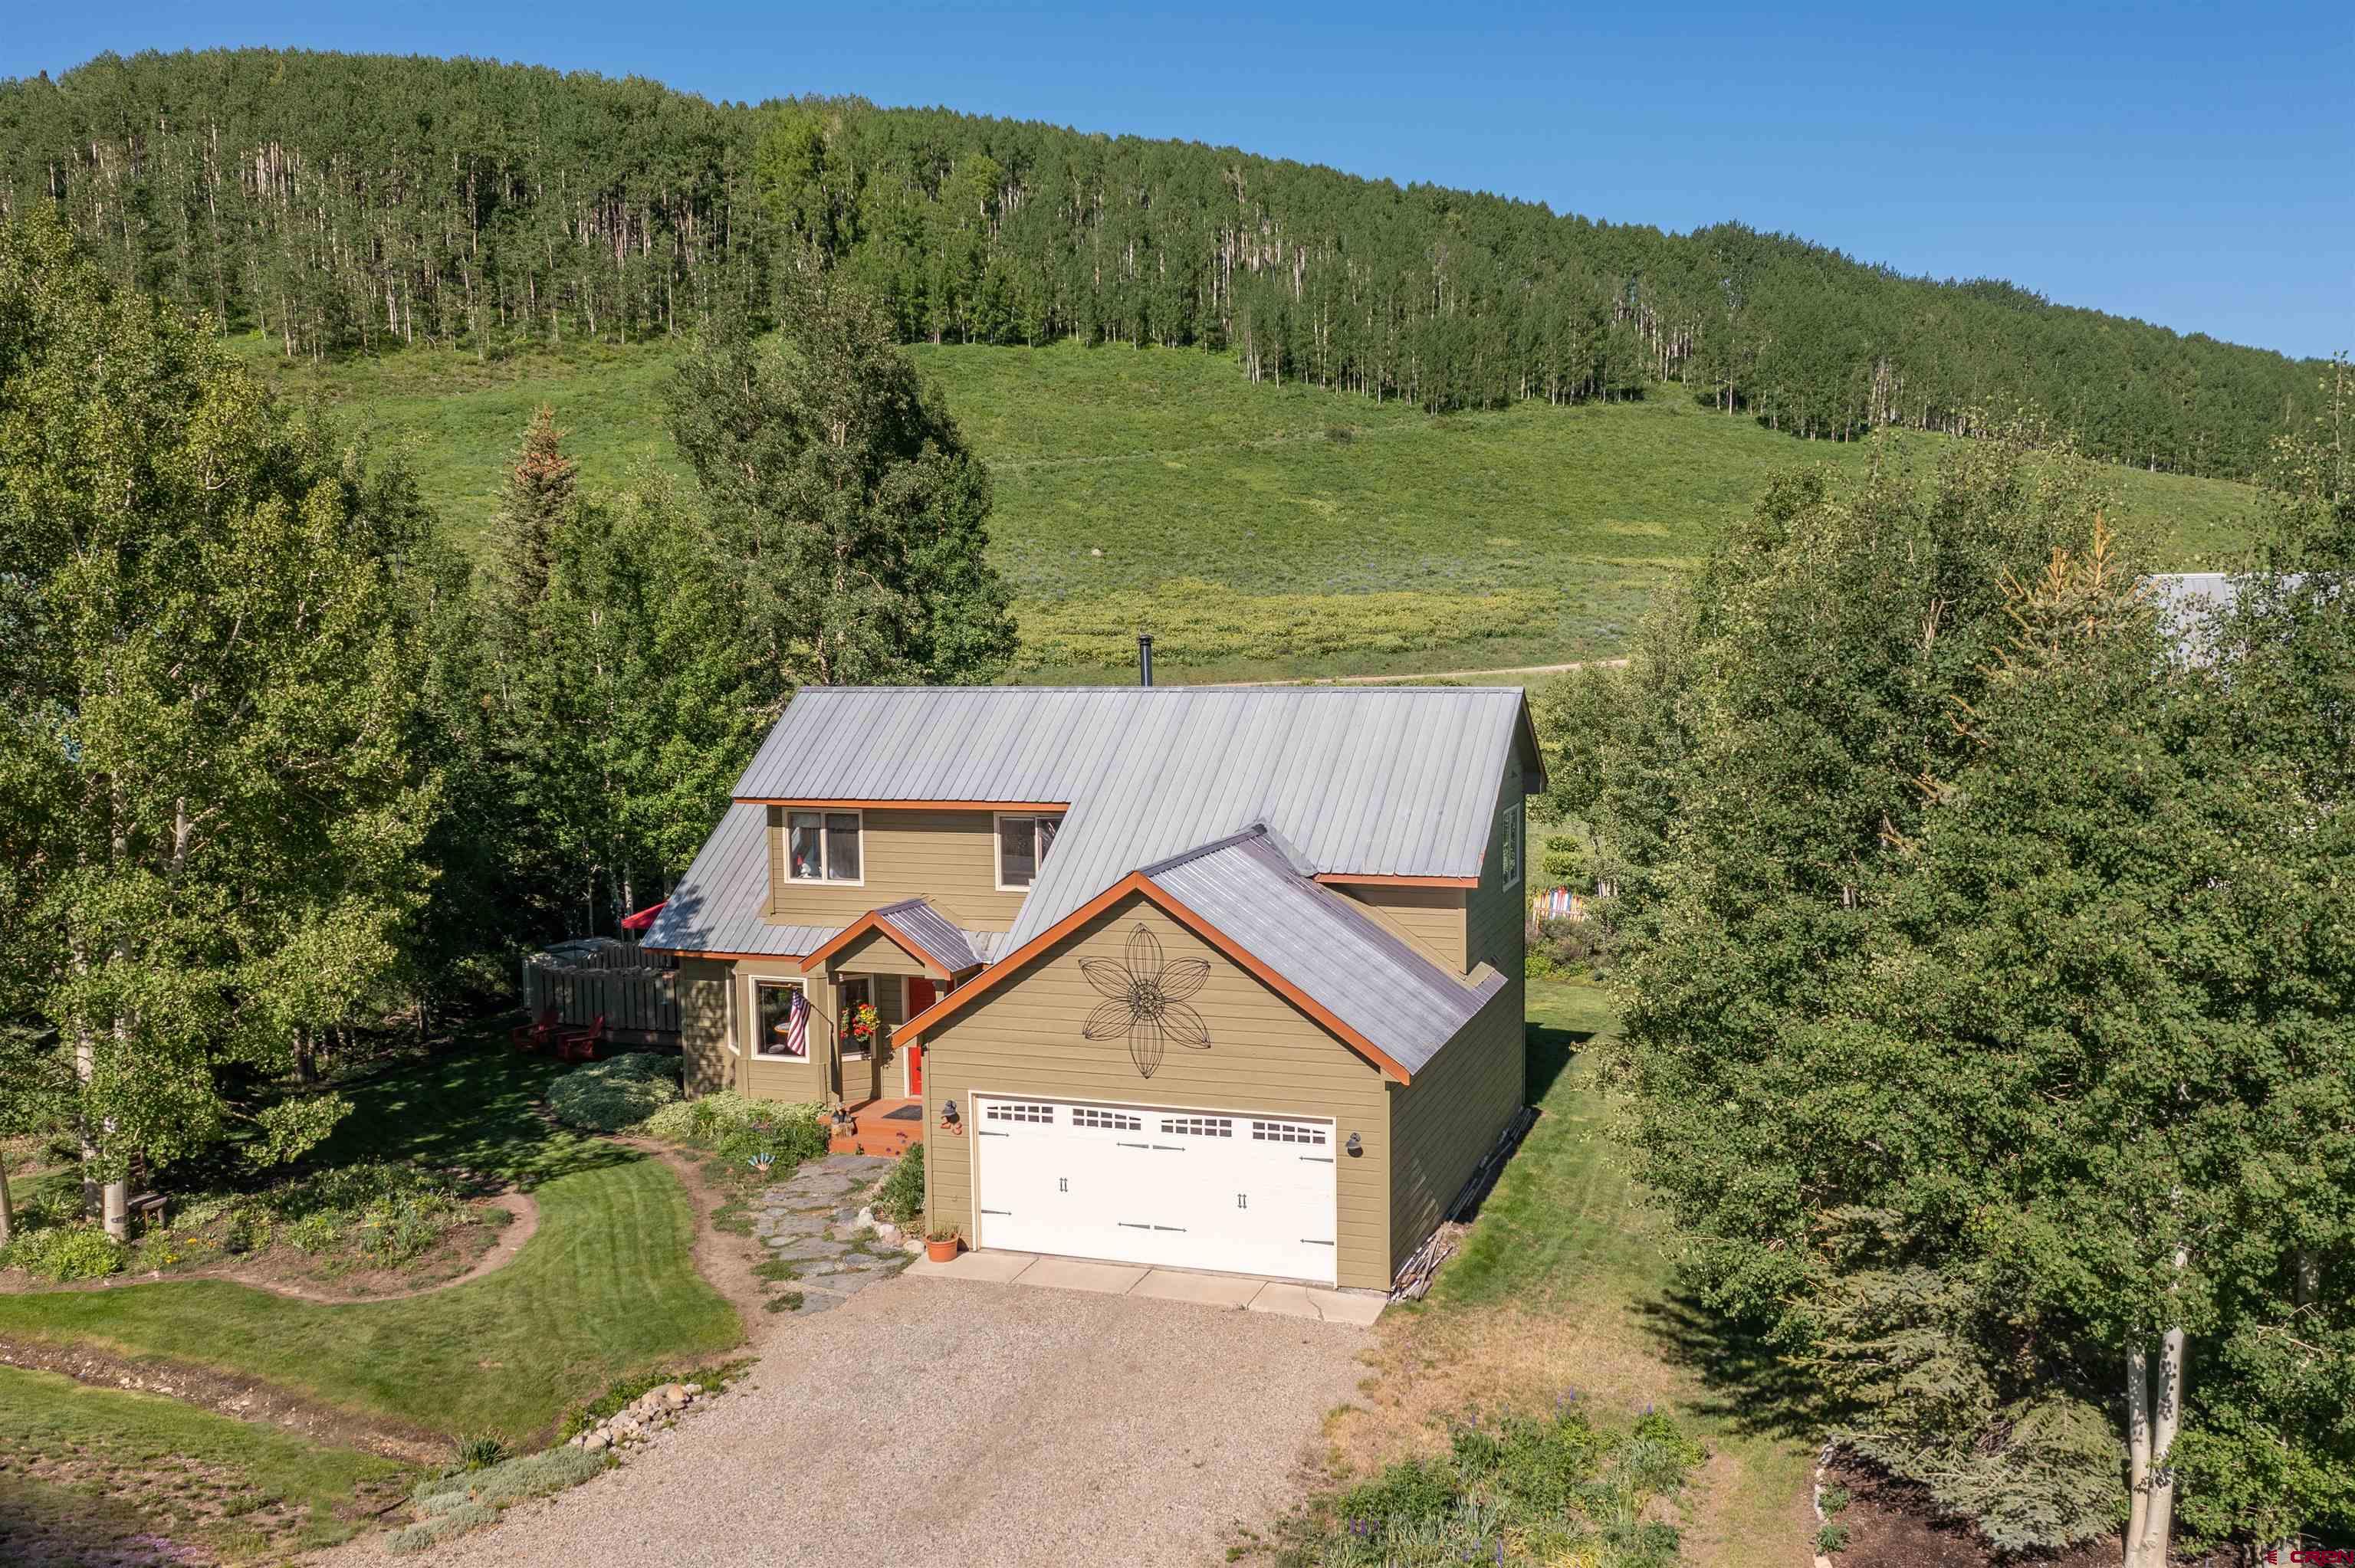 23 Paradise Road, Mt. Crested Butte, CO 